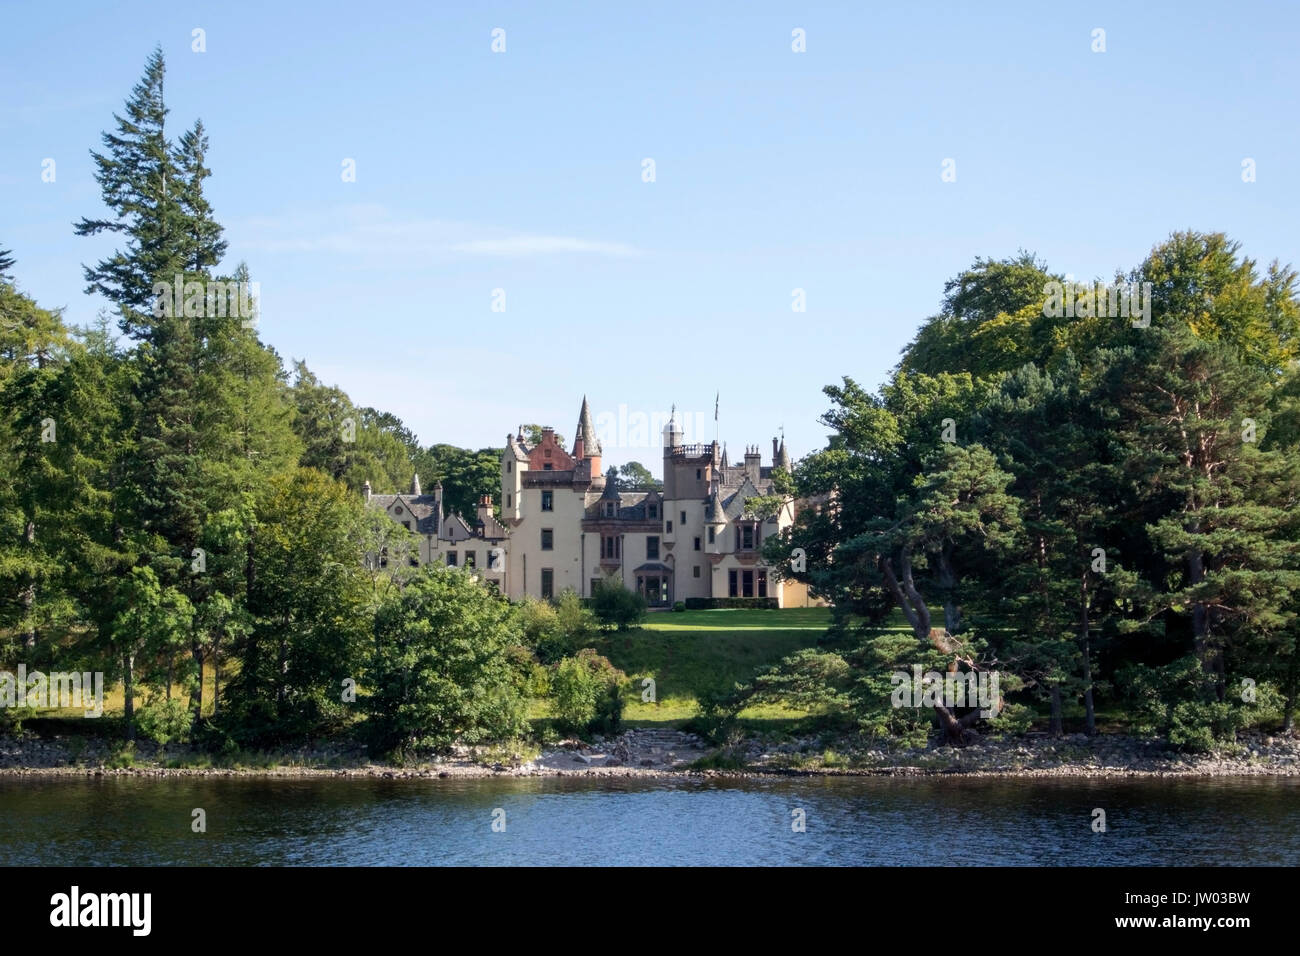 Historic 17th Century Aldourie Castle Loch Ness Caledonian Canal Inverness Scotland exterior view of Grade A Listed 17th century Scottish Baronial sty Stock Photo